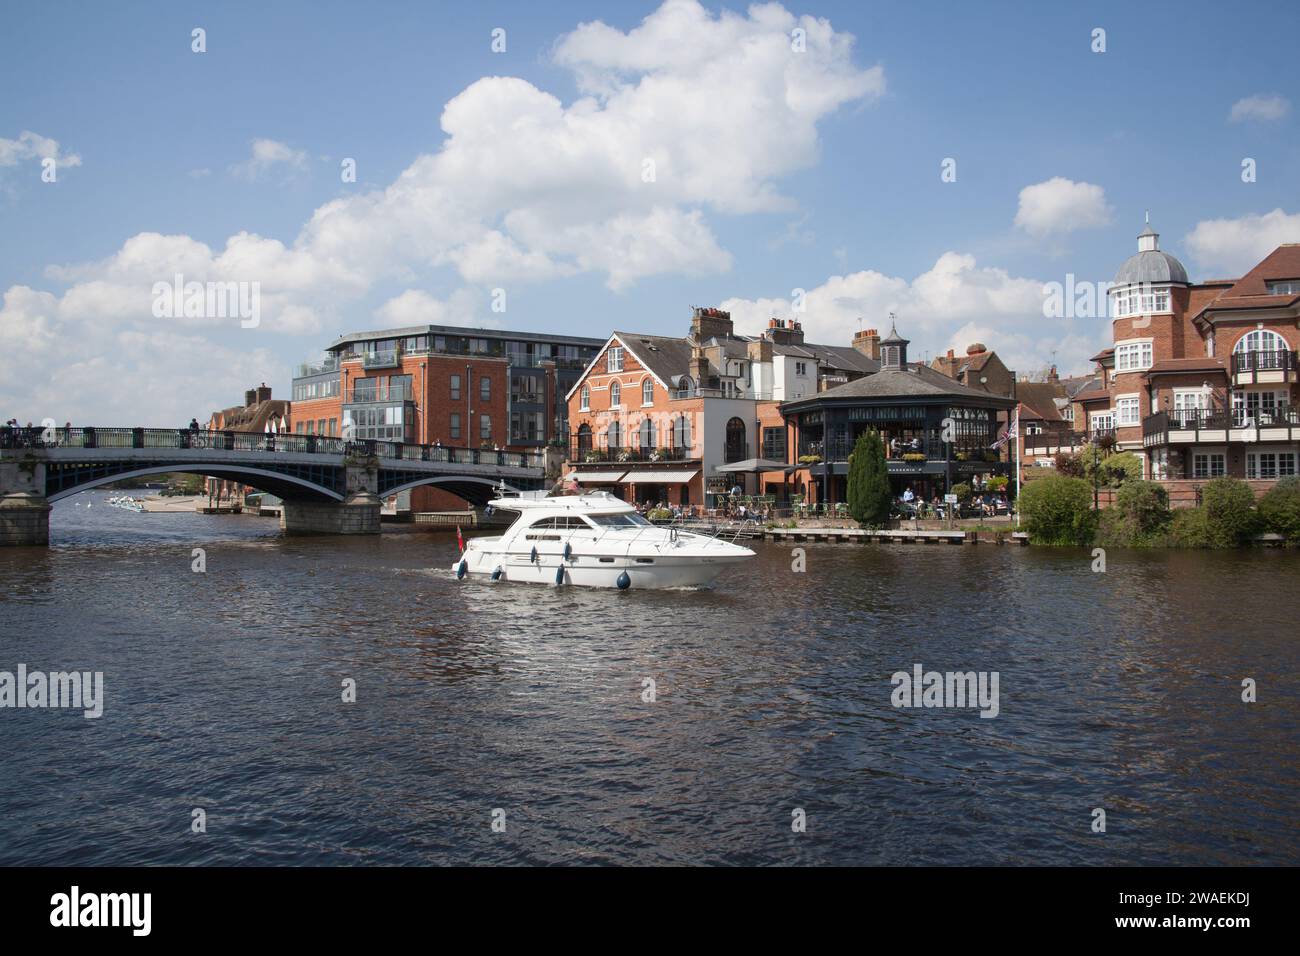 A small boat on the Windsor Eton Bridge, over the River Thames between Windsor and Eton in the UK Stock Photo